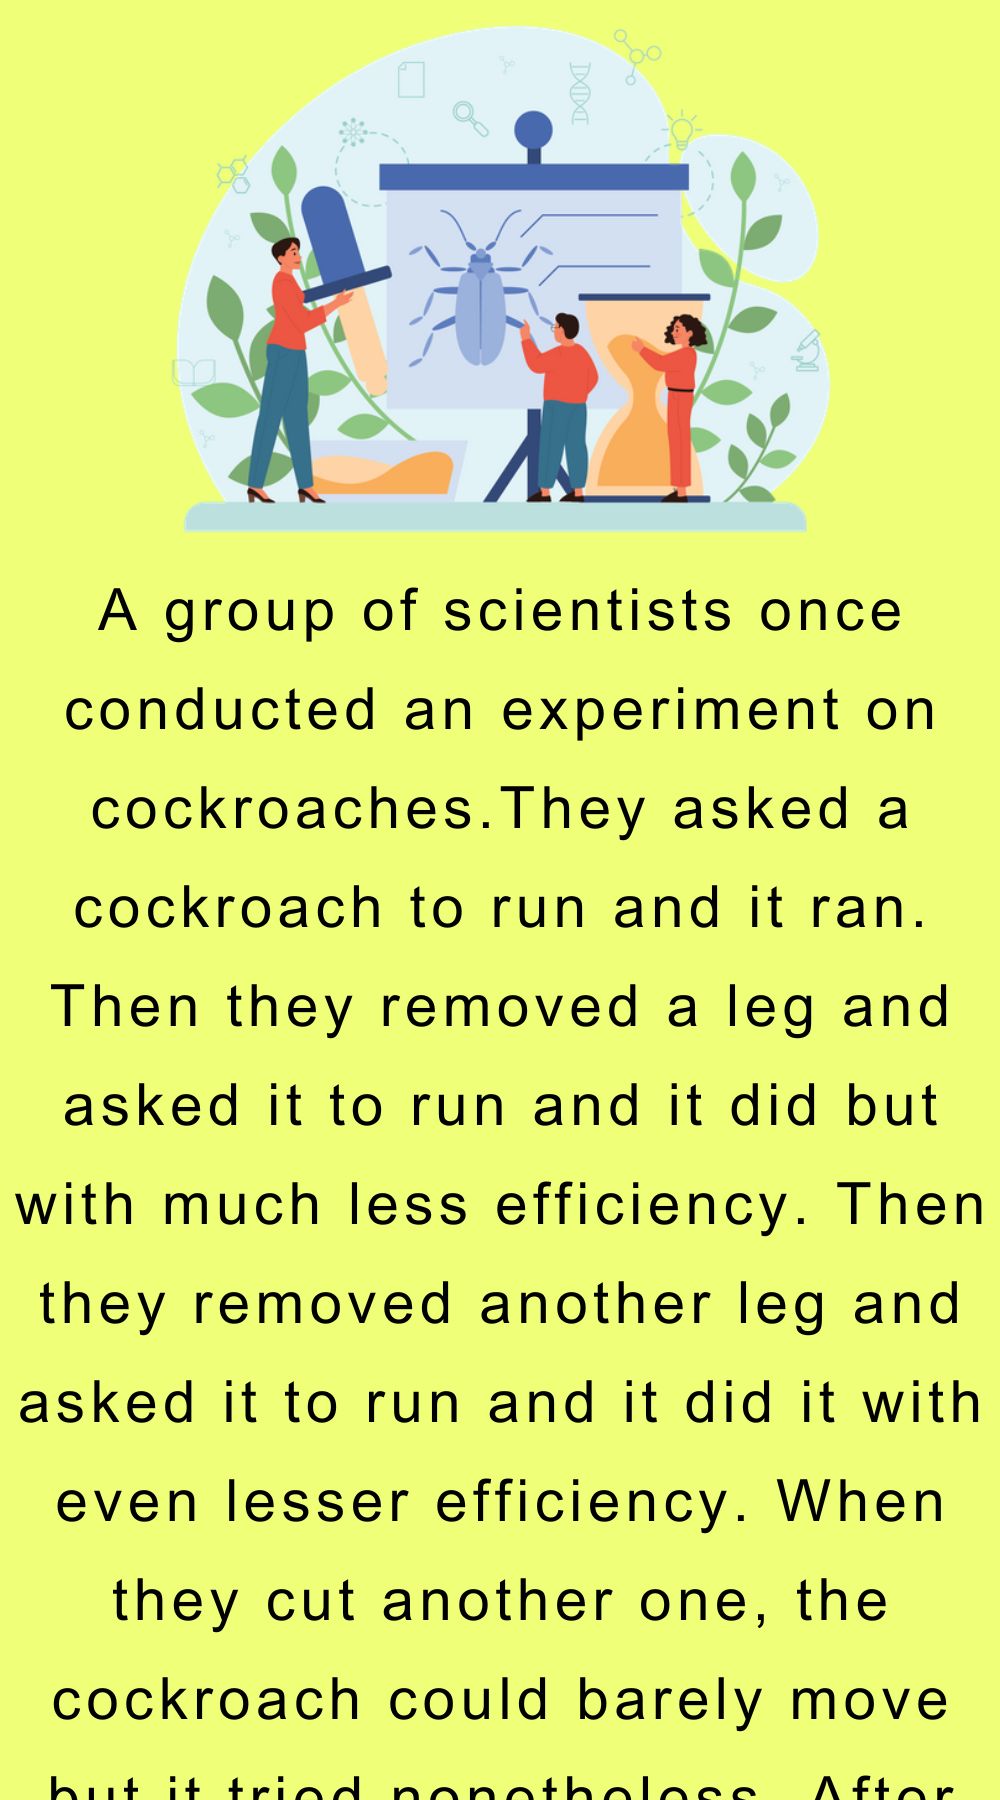 A group of scientists once conducted an experiment